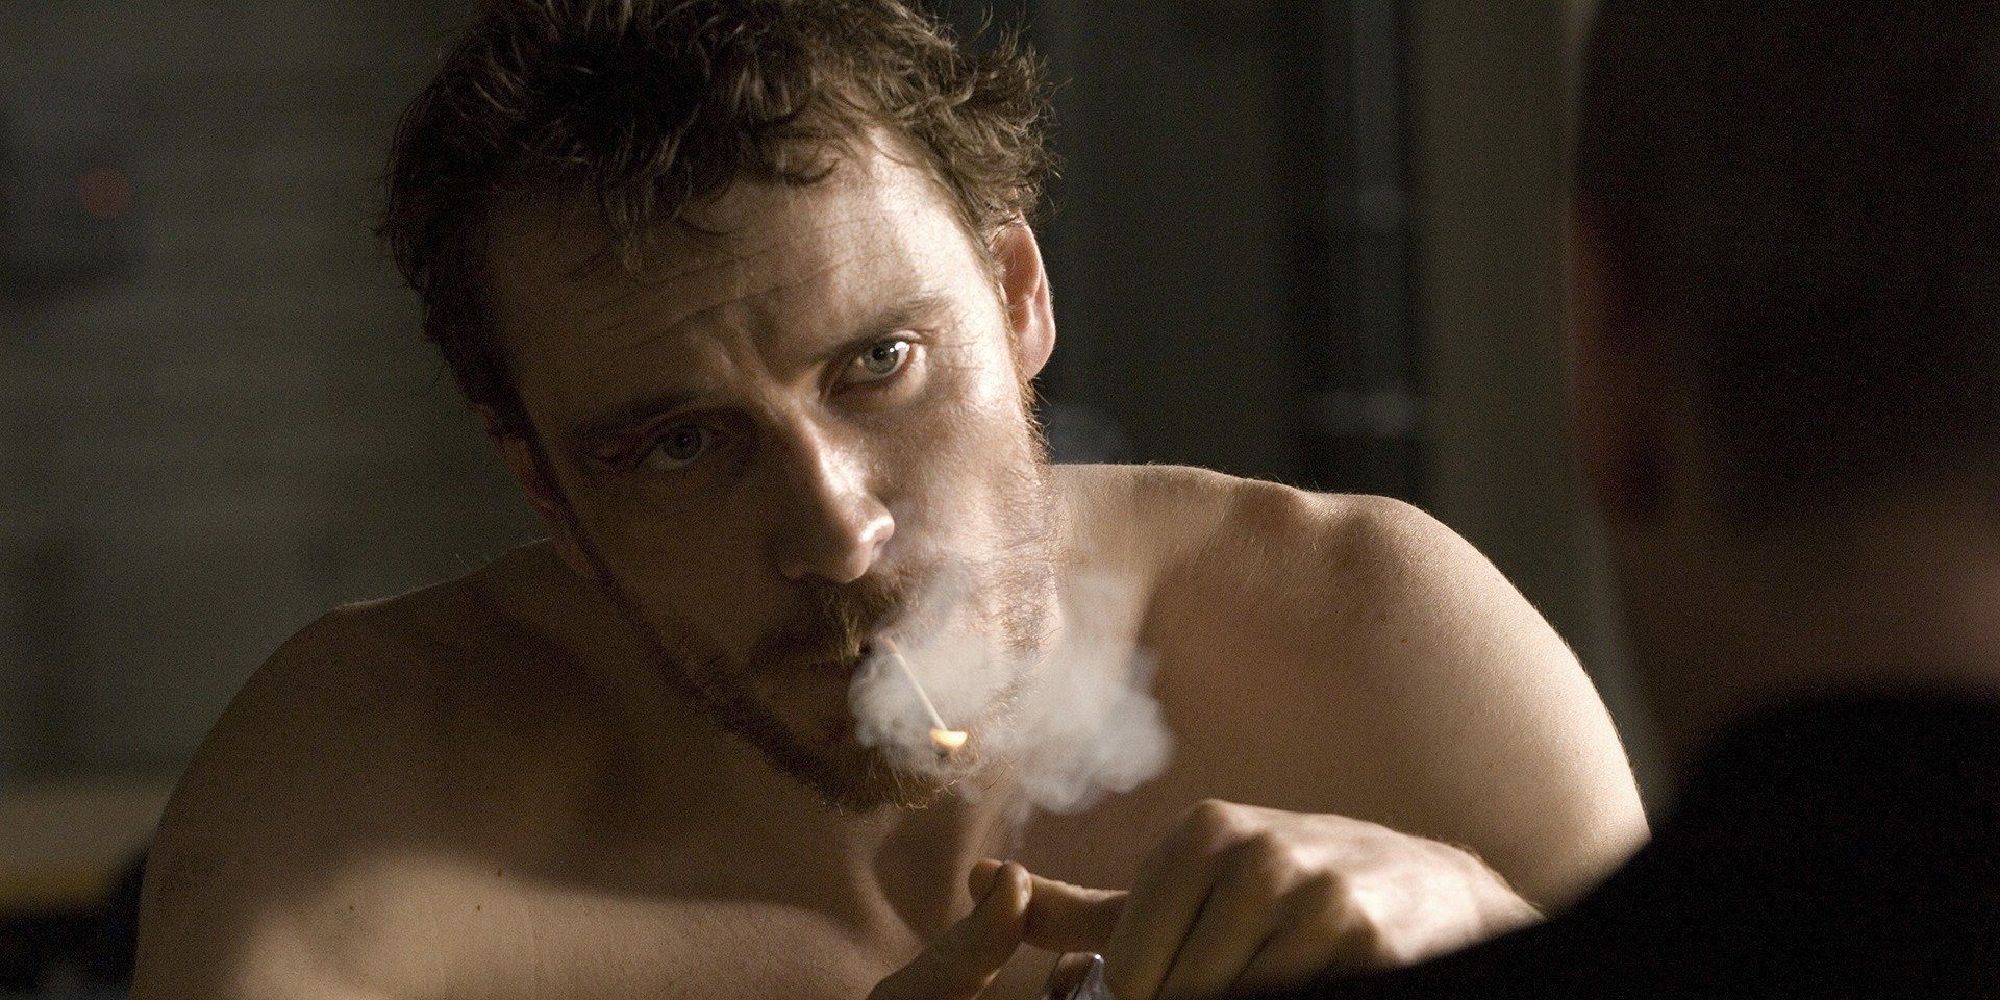 Michael Fassbender as Bobby Sands smoking and looking somberly at someone off camera in the film Hunger - 2008